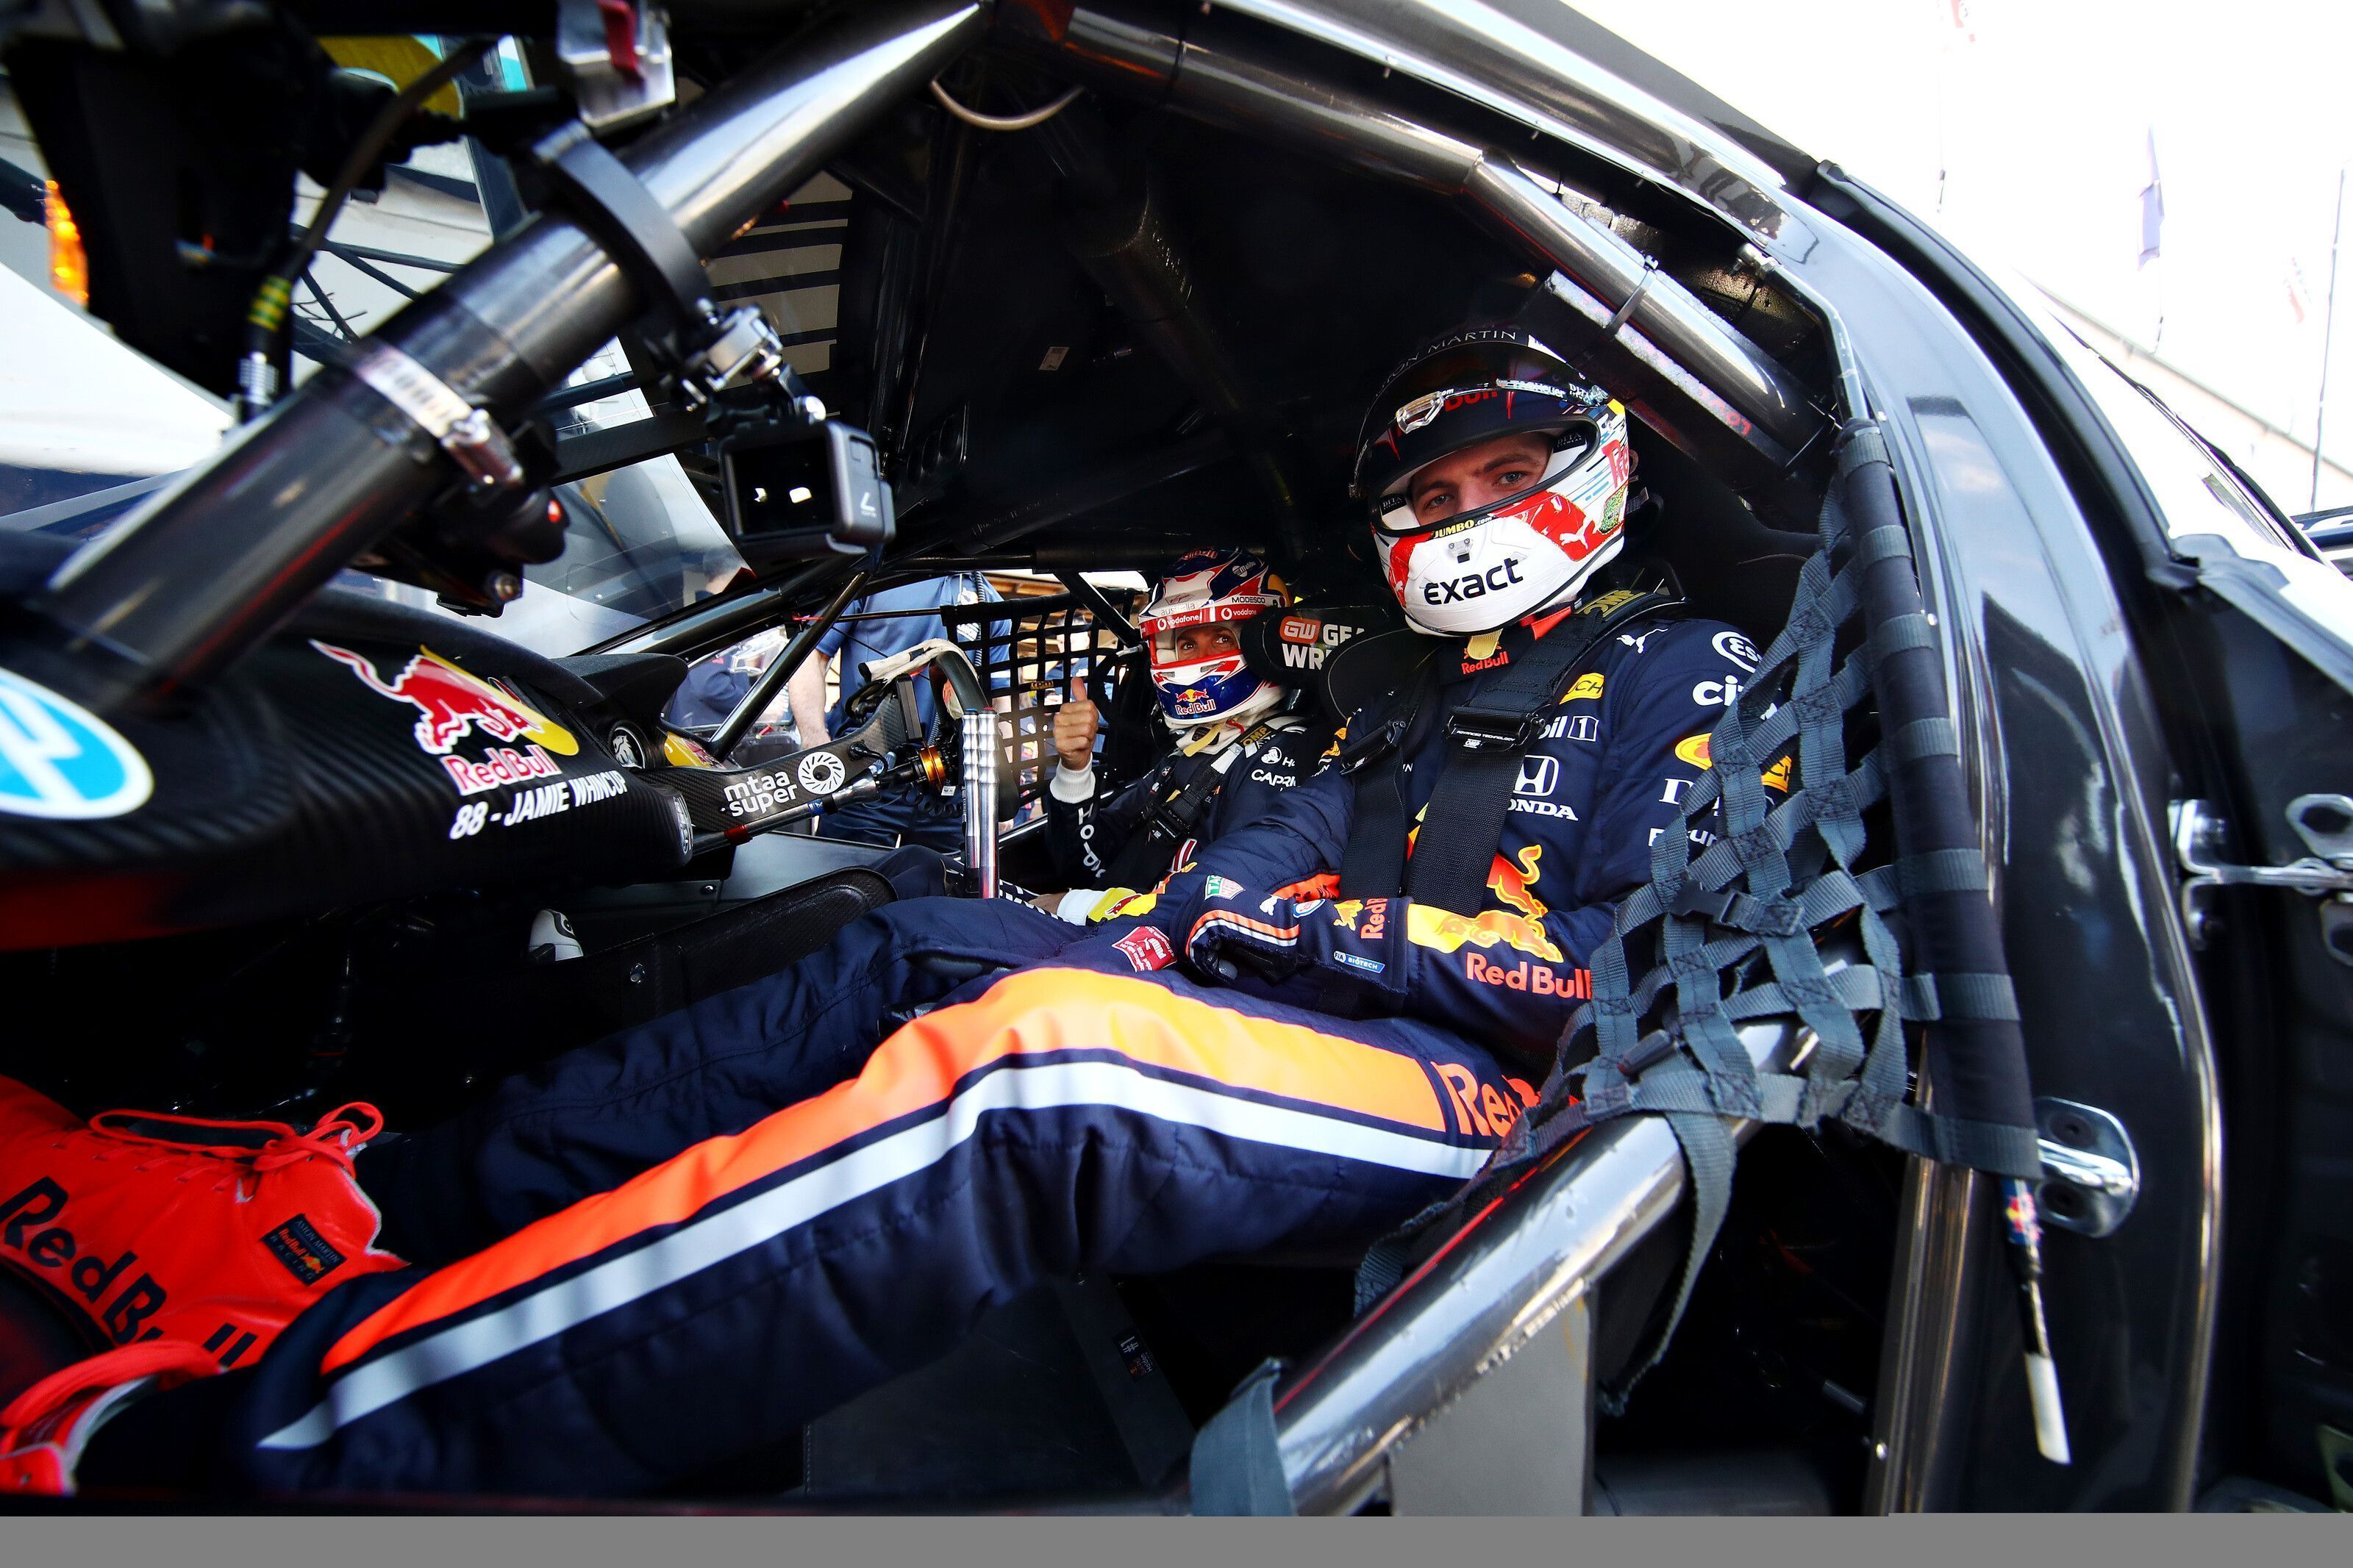 F1 driverMax Verstappen as a passenger to Jamie Whincup in Holden Supercar